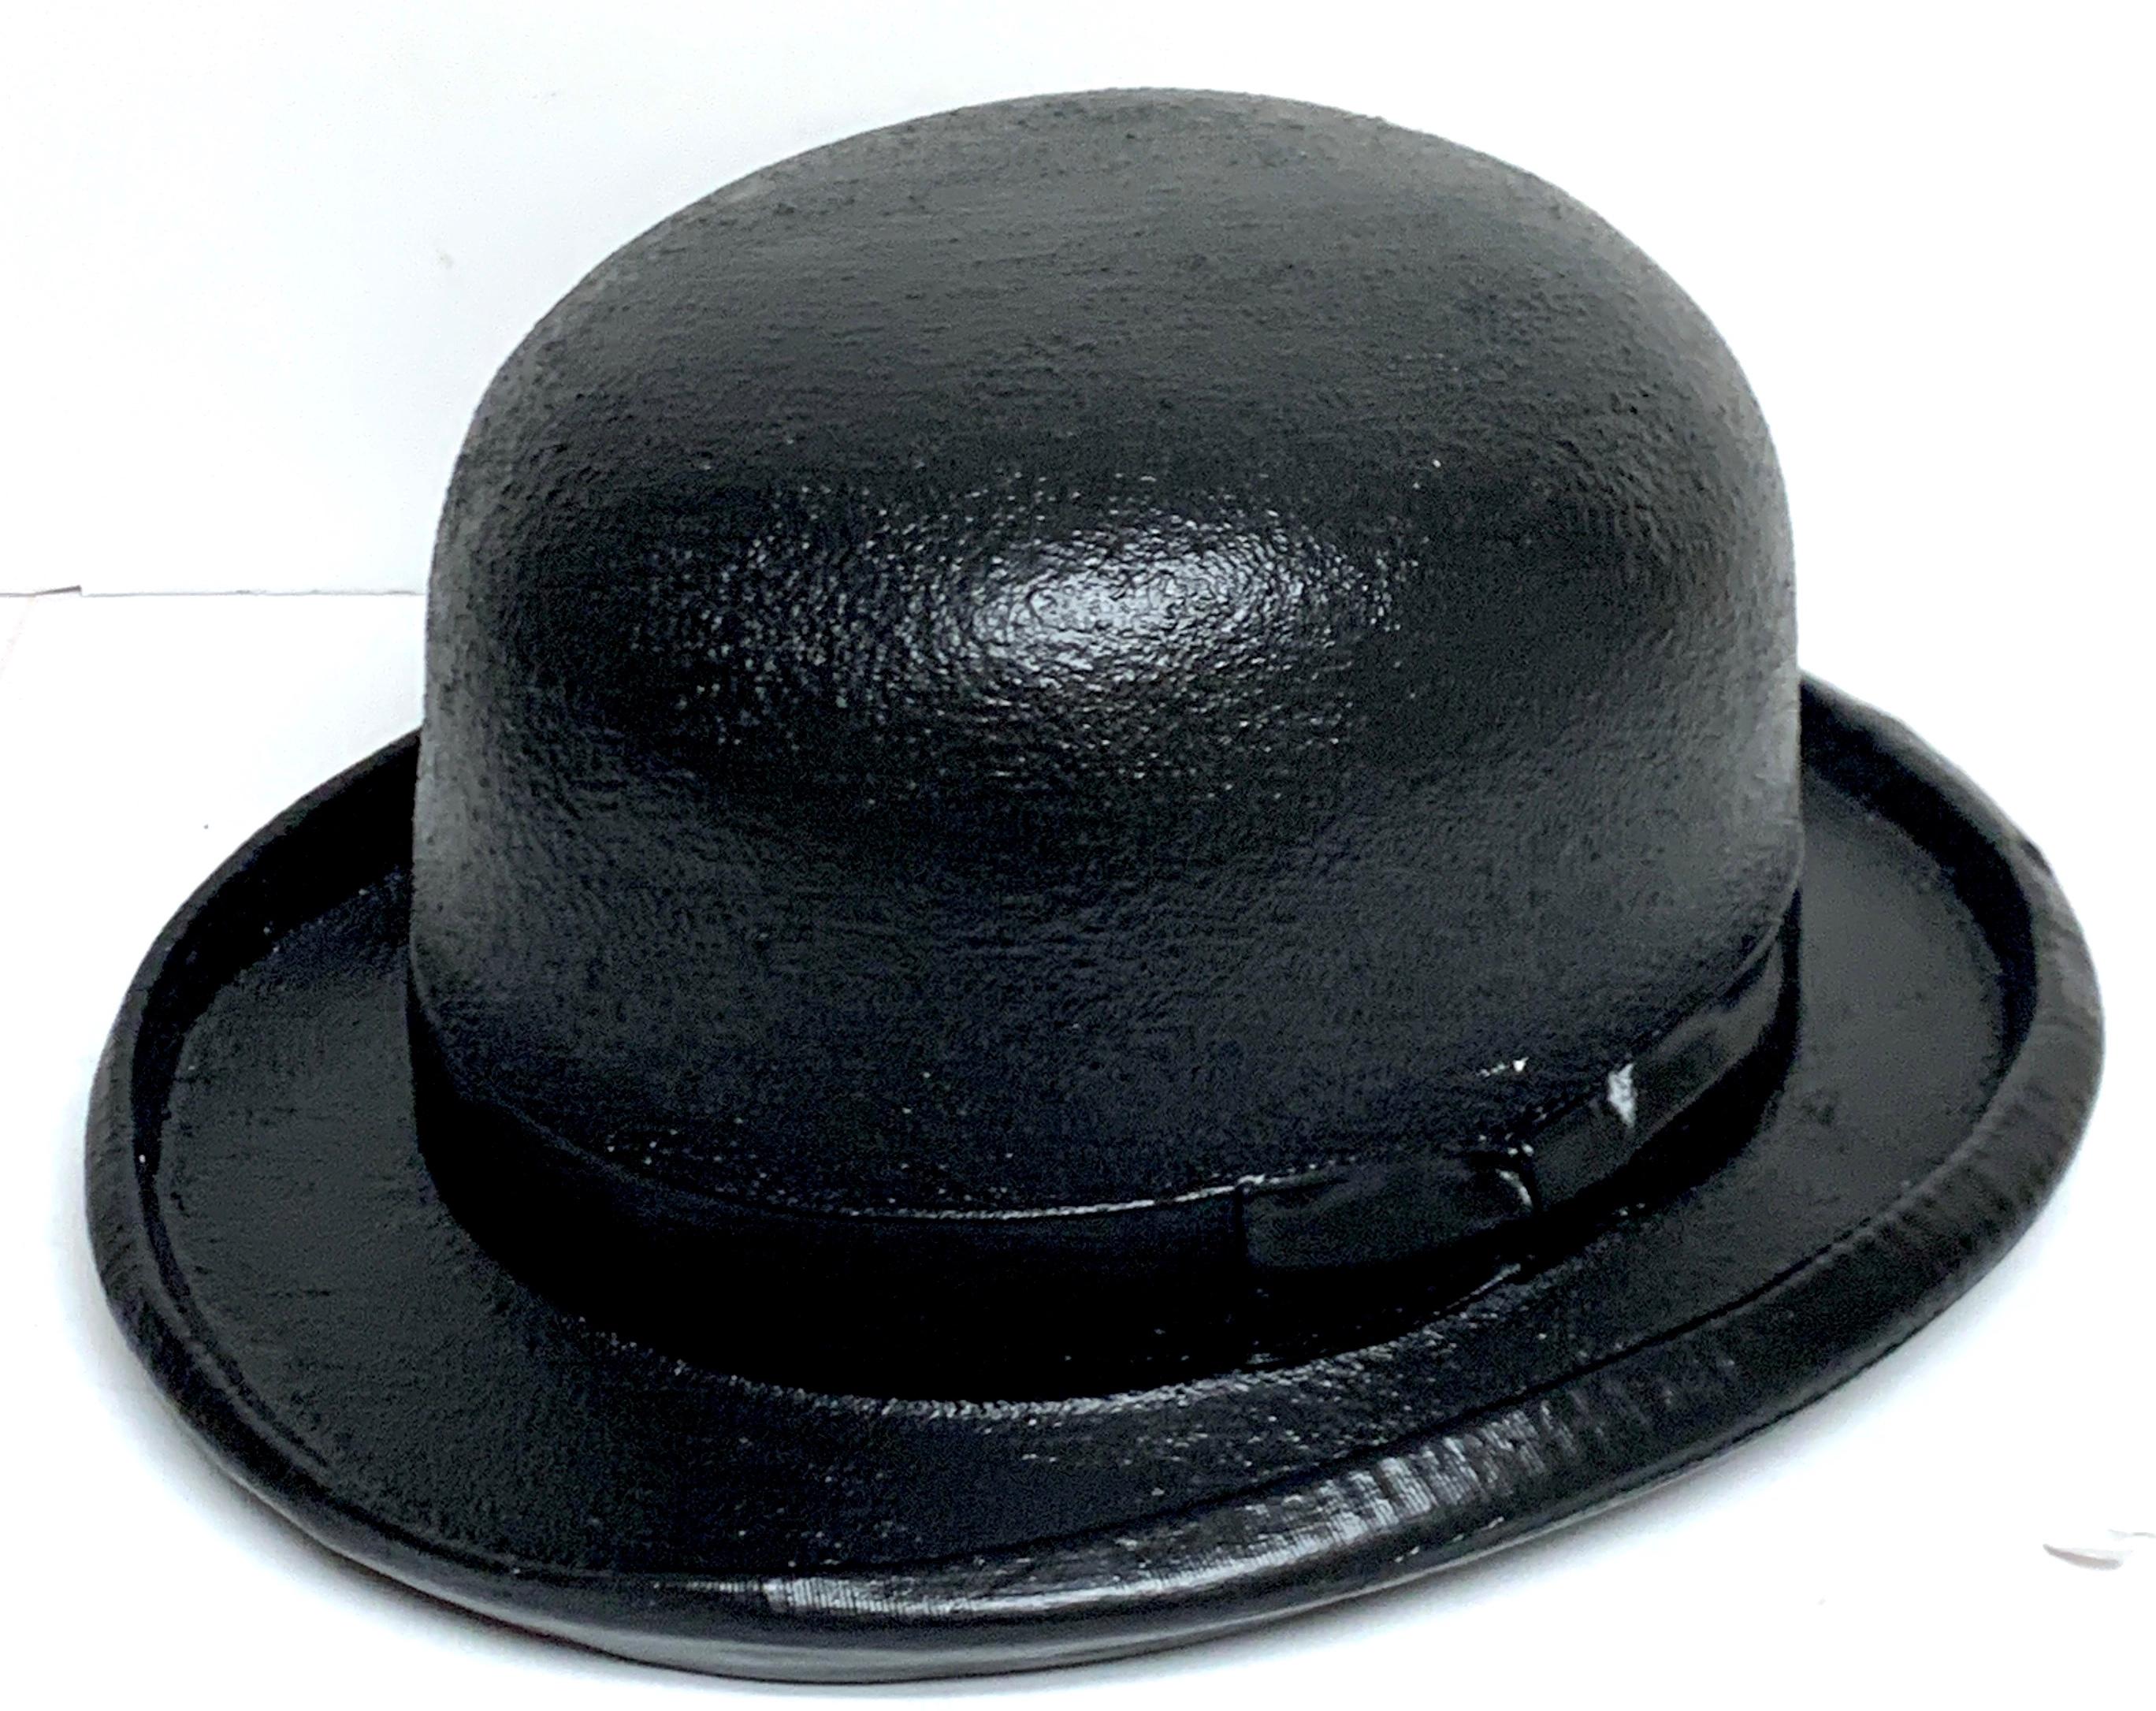 1970s Magritte style bowler hat sculpture, Whimsical, lacquered plaster model of a iconic surrealist focal point. Unmarked.
  